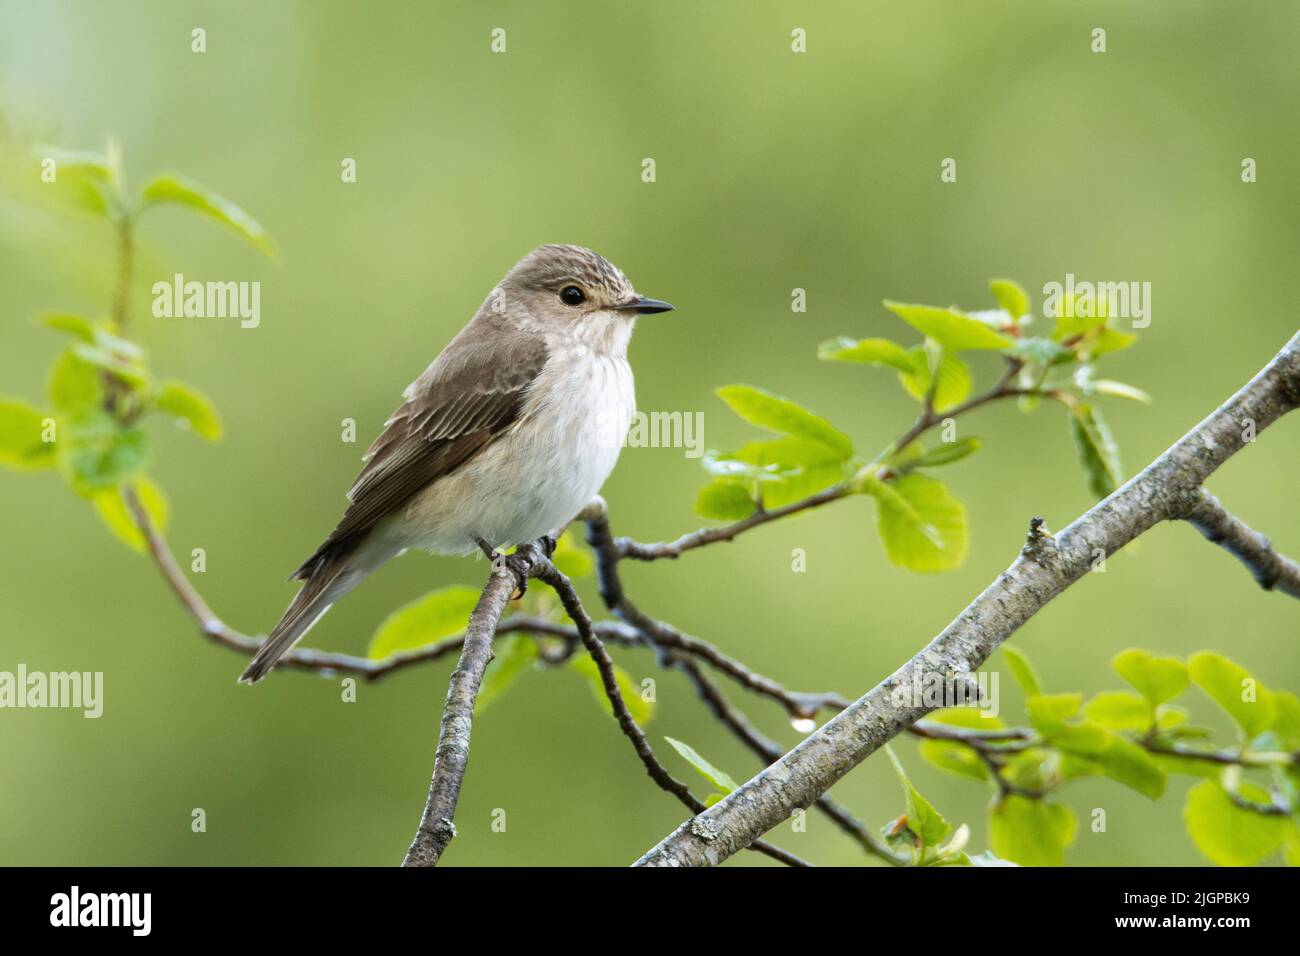 Close-up of a Spotted flycatcher, Muscicapa striata perched in a springtime forest in Estonia Stock Photo